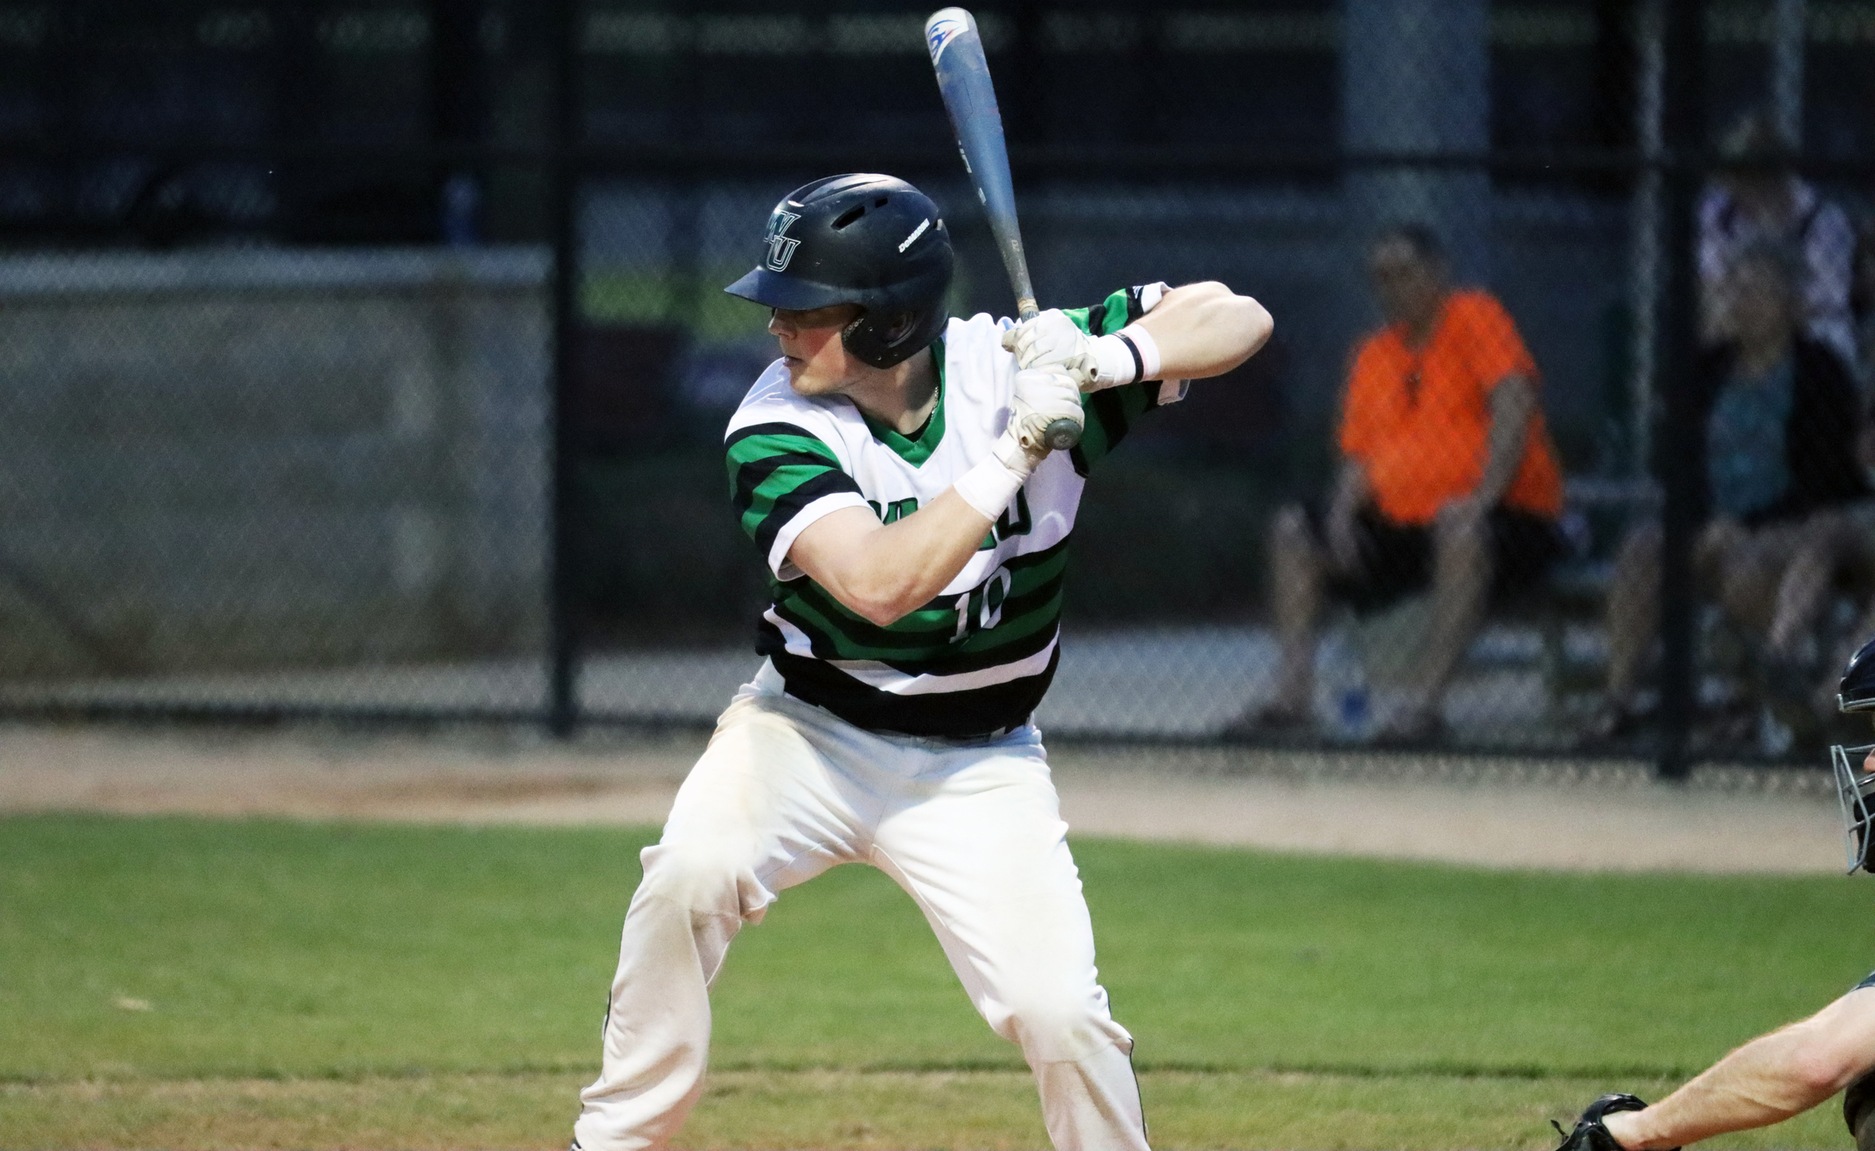 Photo of Dan Hyatt who batted 3-for-5 with two doubles and two RBI against St. Cloud State. Copyright 2020; Wilmington University. All rights reserved. Photo by Dan Lauletta. March 5, 2020 vs. St. Cloud State at the Lake Myrtle Sports Complex.